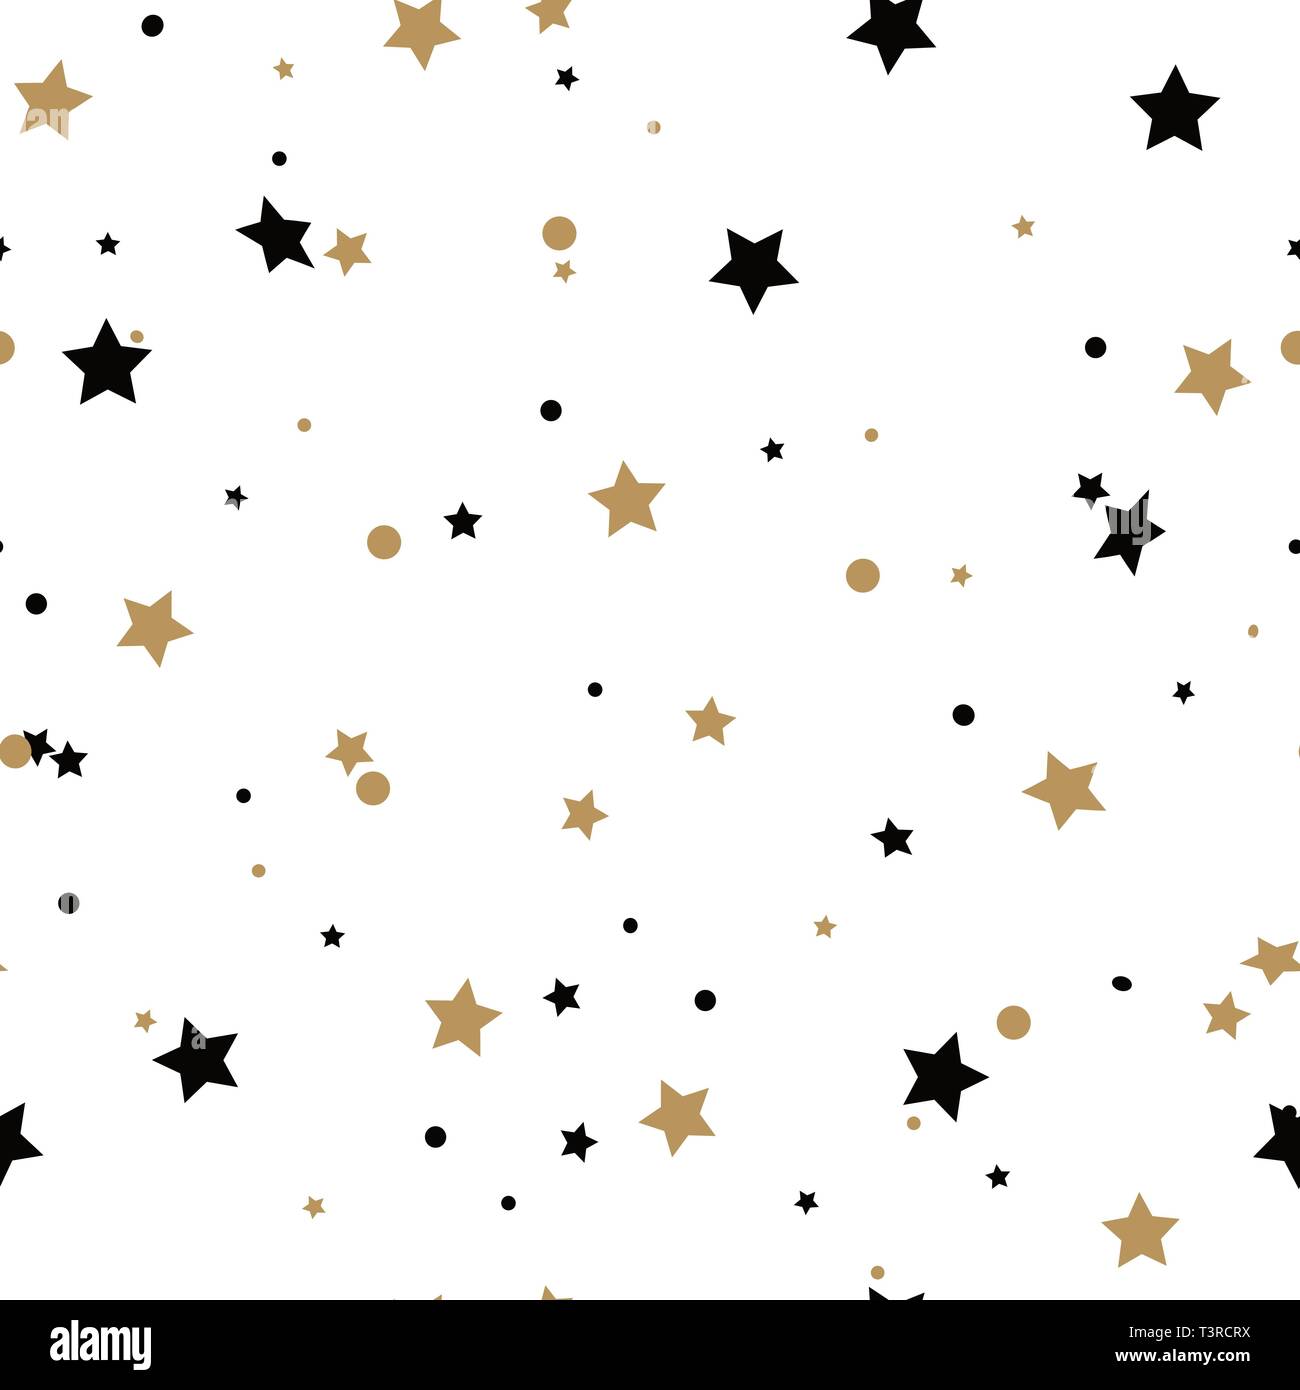 Premium Vector  Cute holiday seamless pattern with gold stars on a white  background. christmas star. ornament for gift wrapping paper, fabric,  clothing, textiles, surface textures.